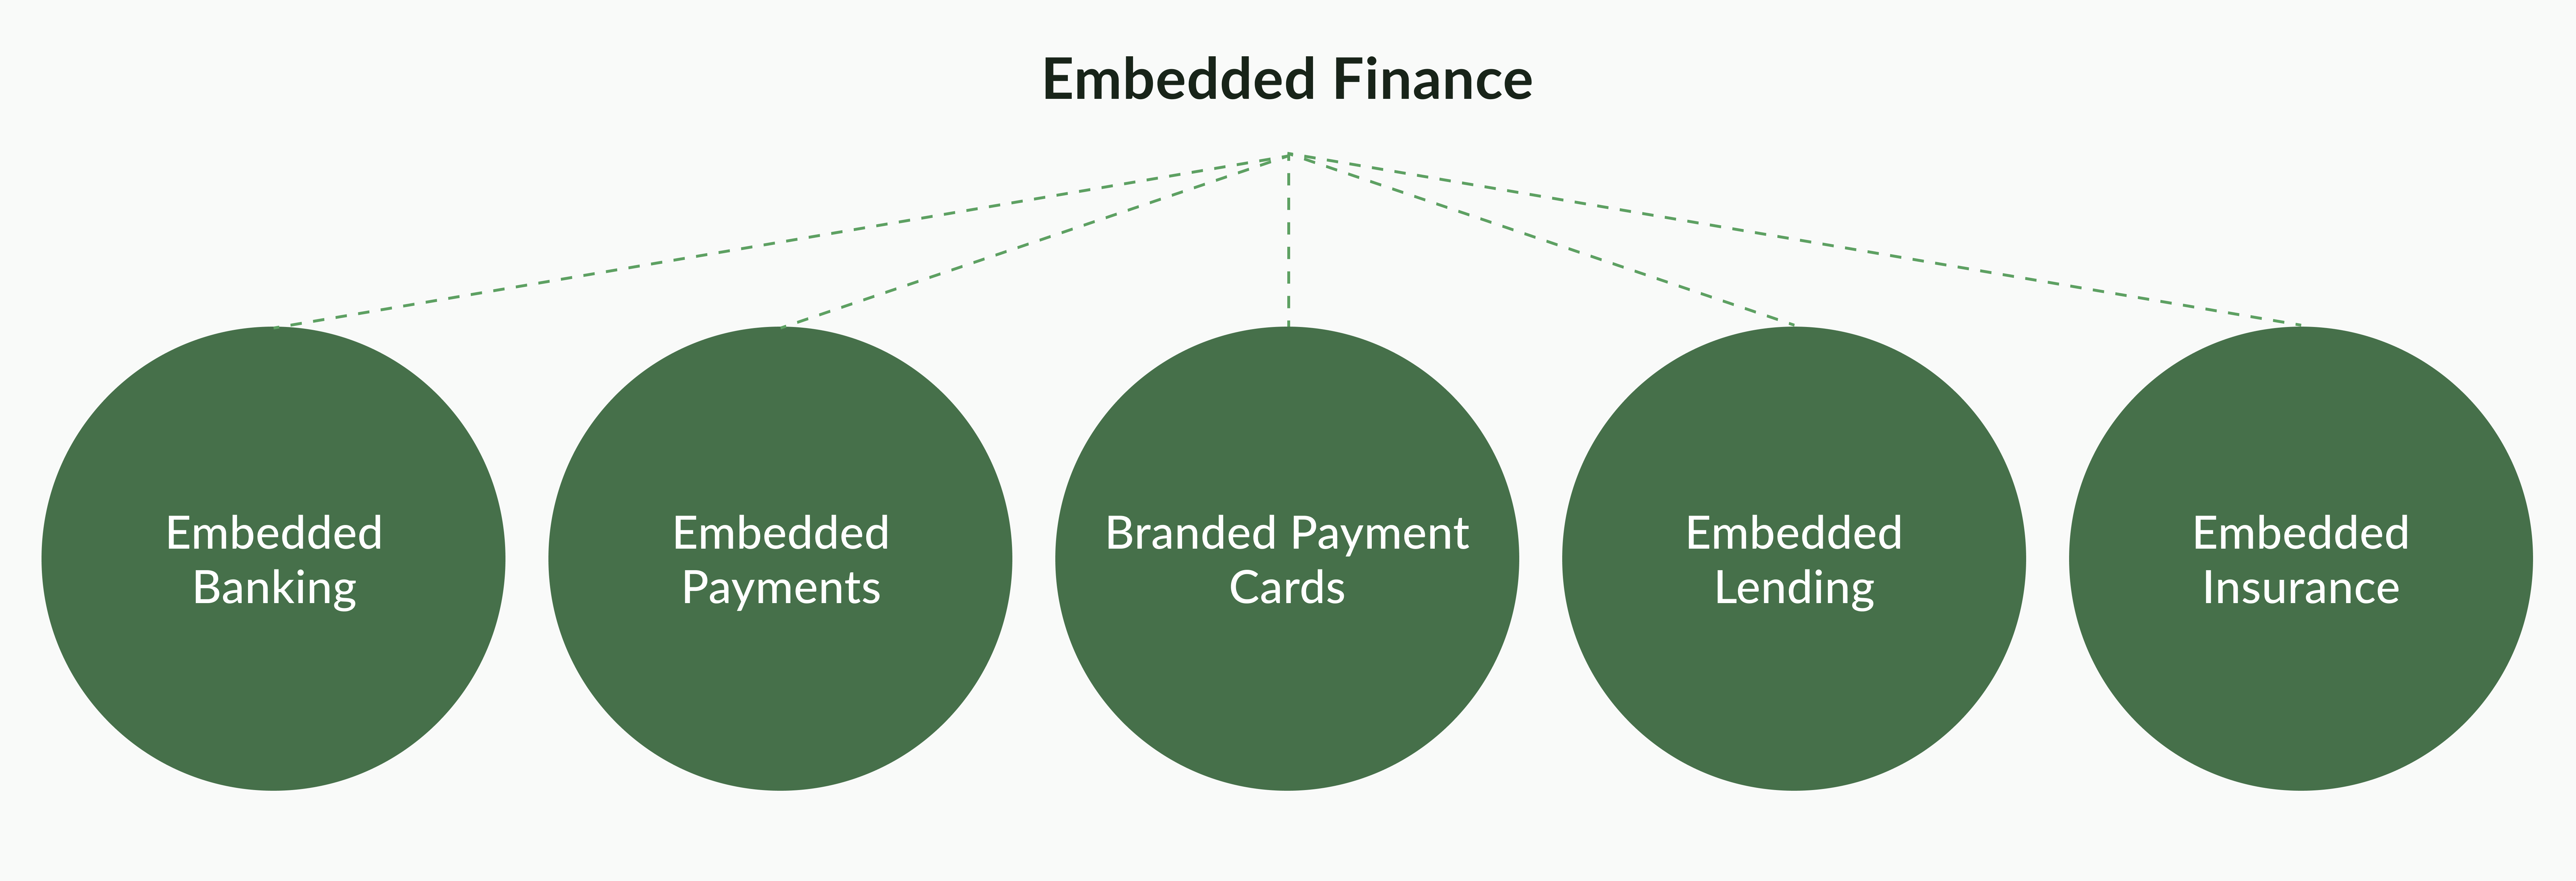 A chart showing embedded finance and the subgroups of embedded finance